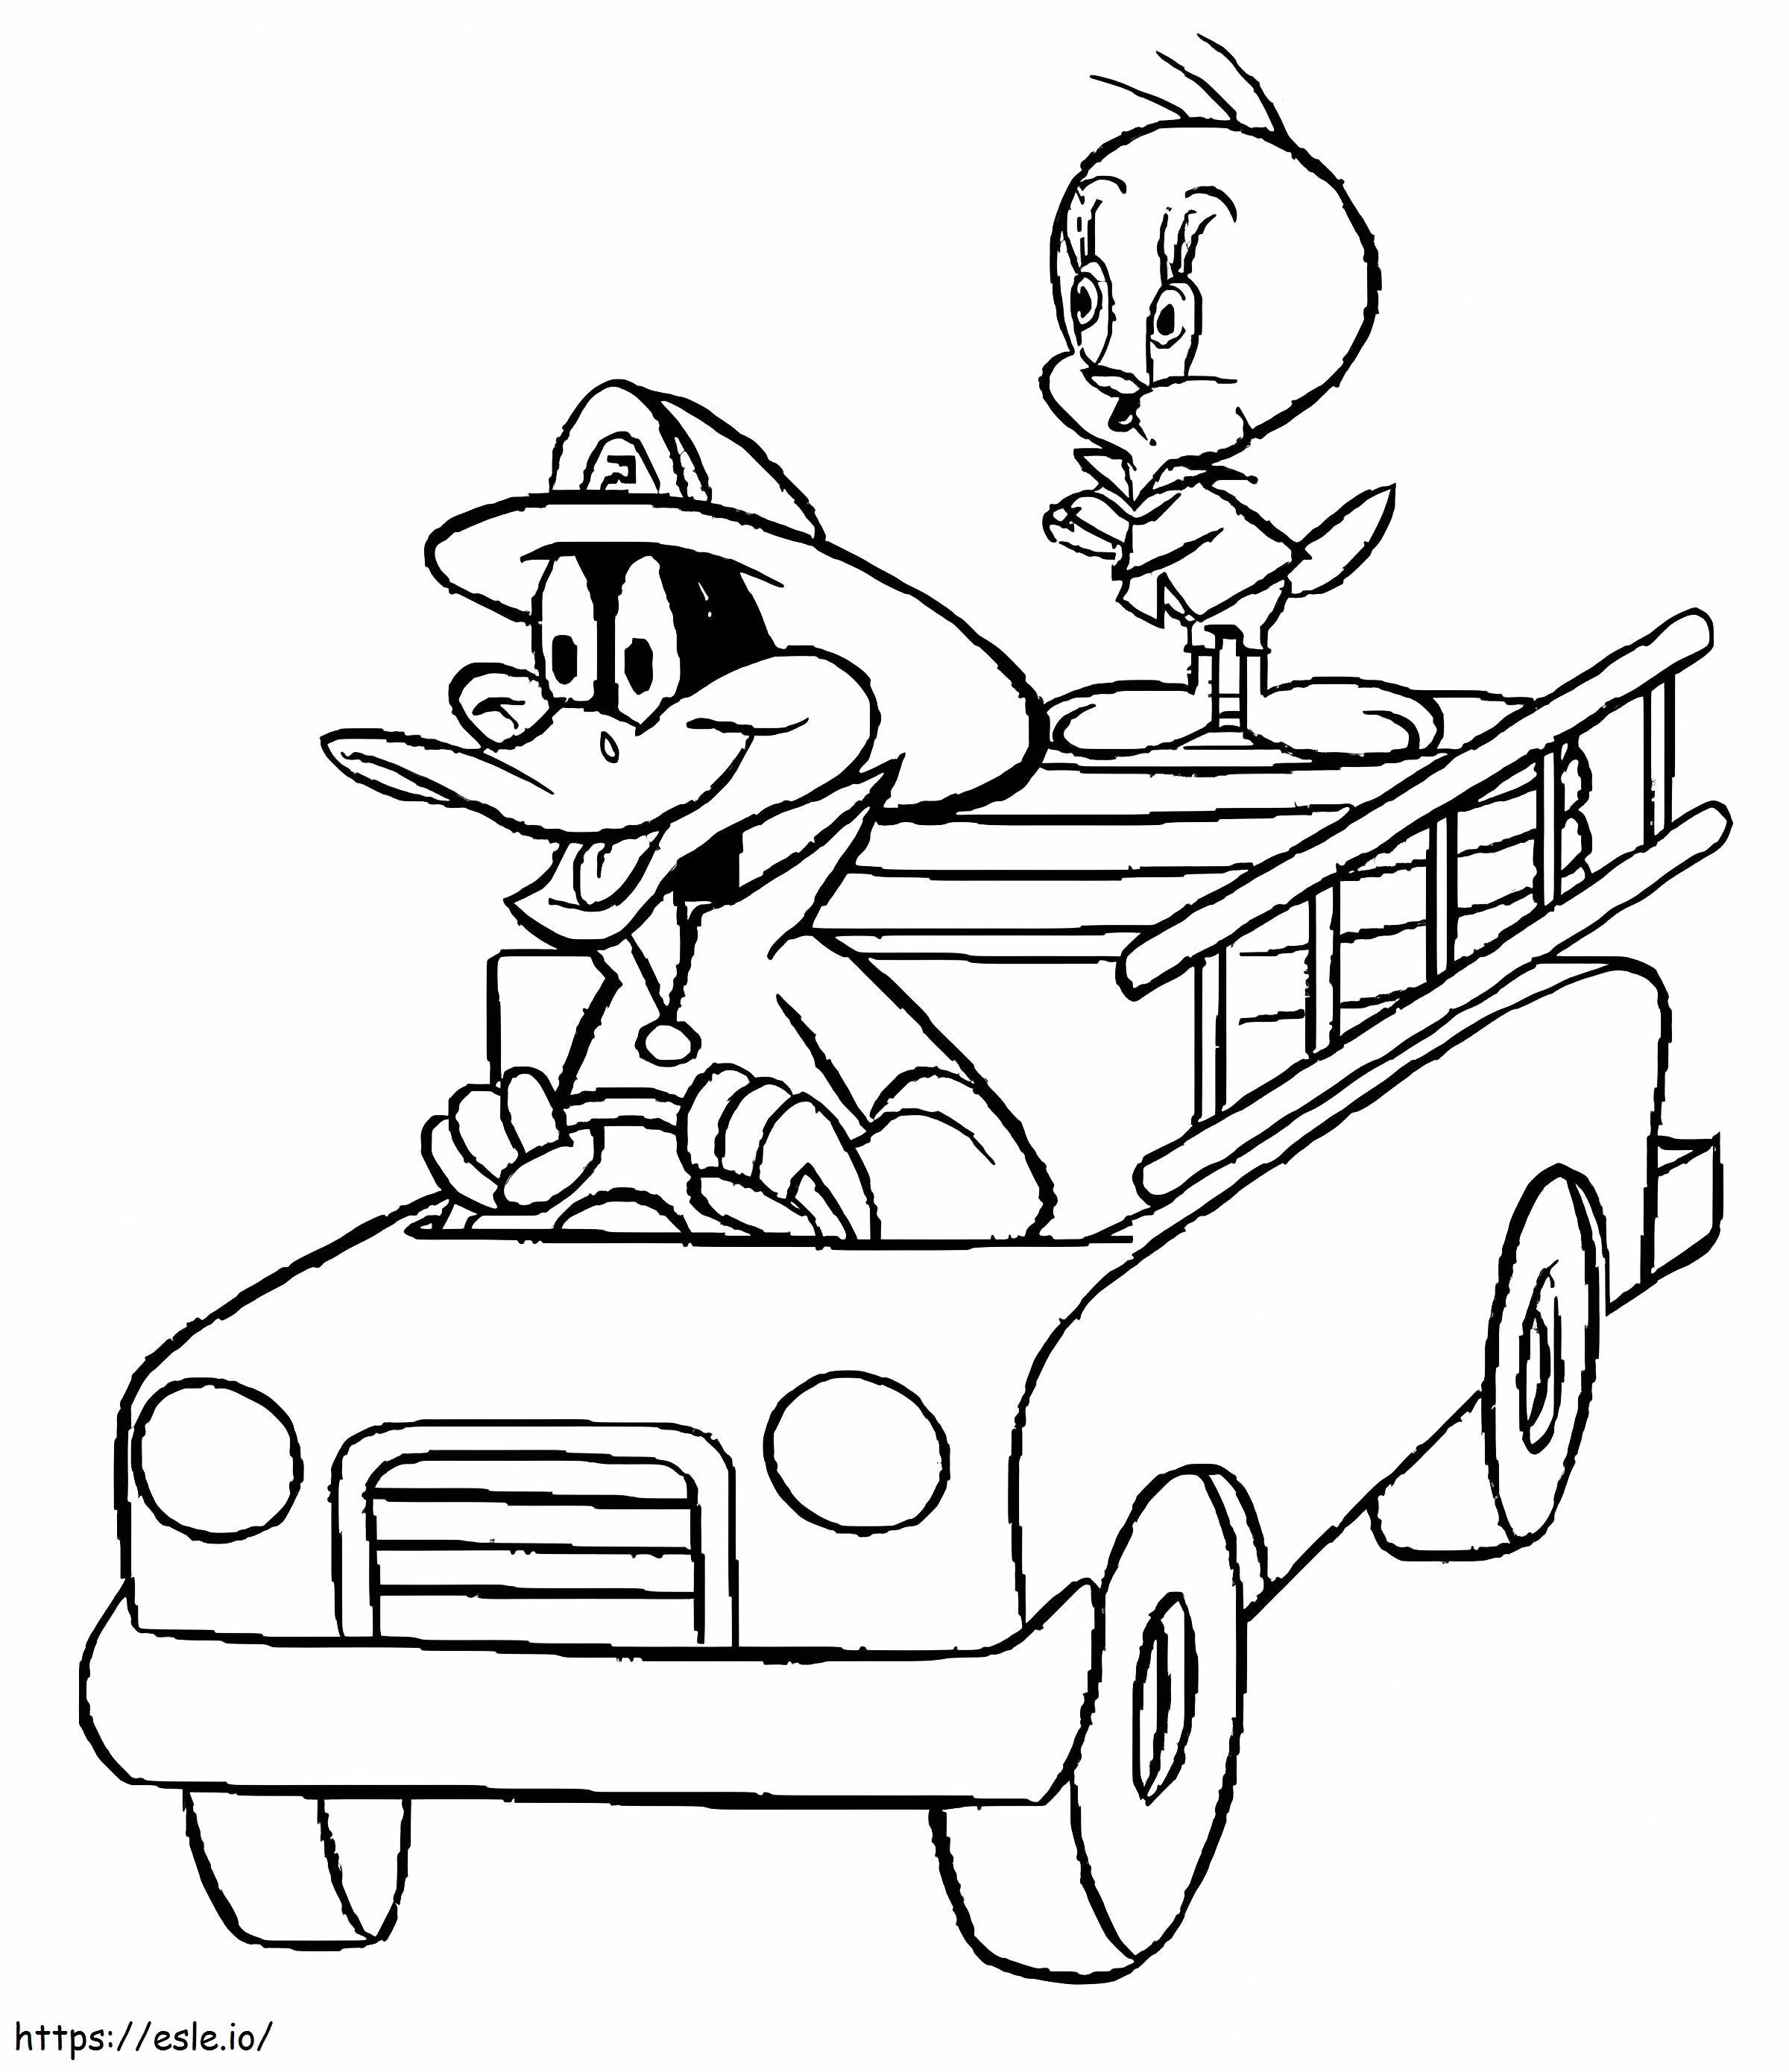 Daffy Duck And Tweety The Fireman coloring page